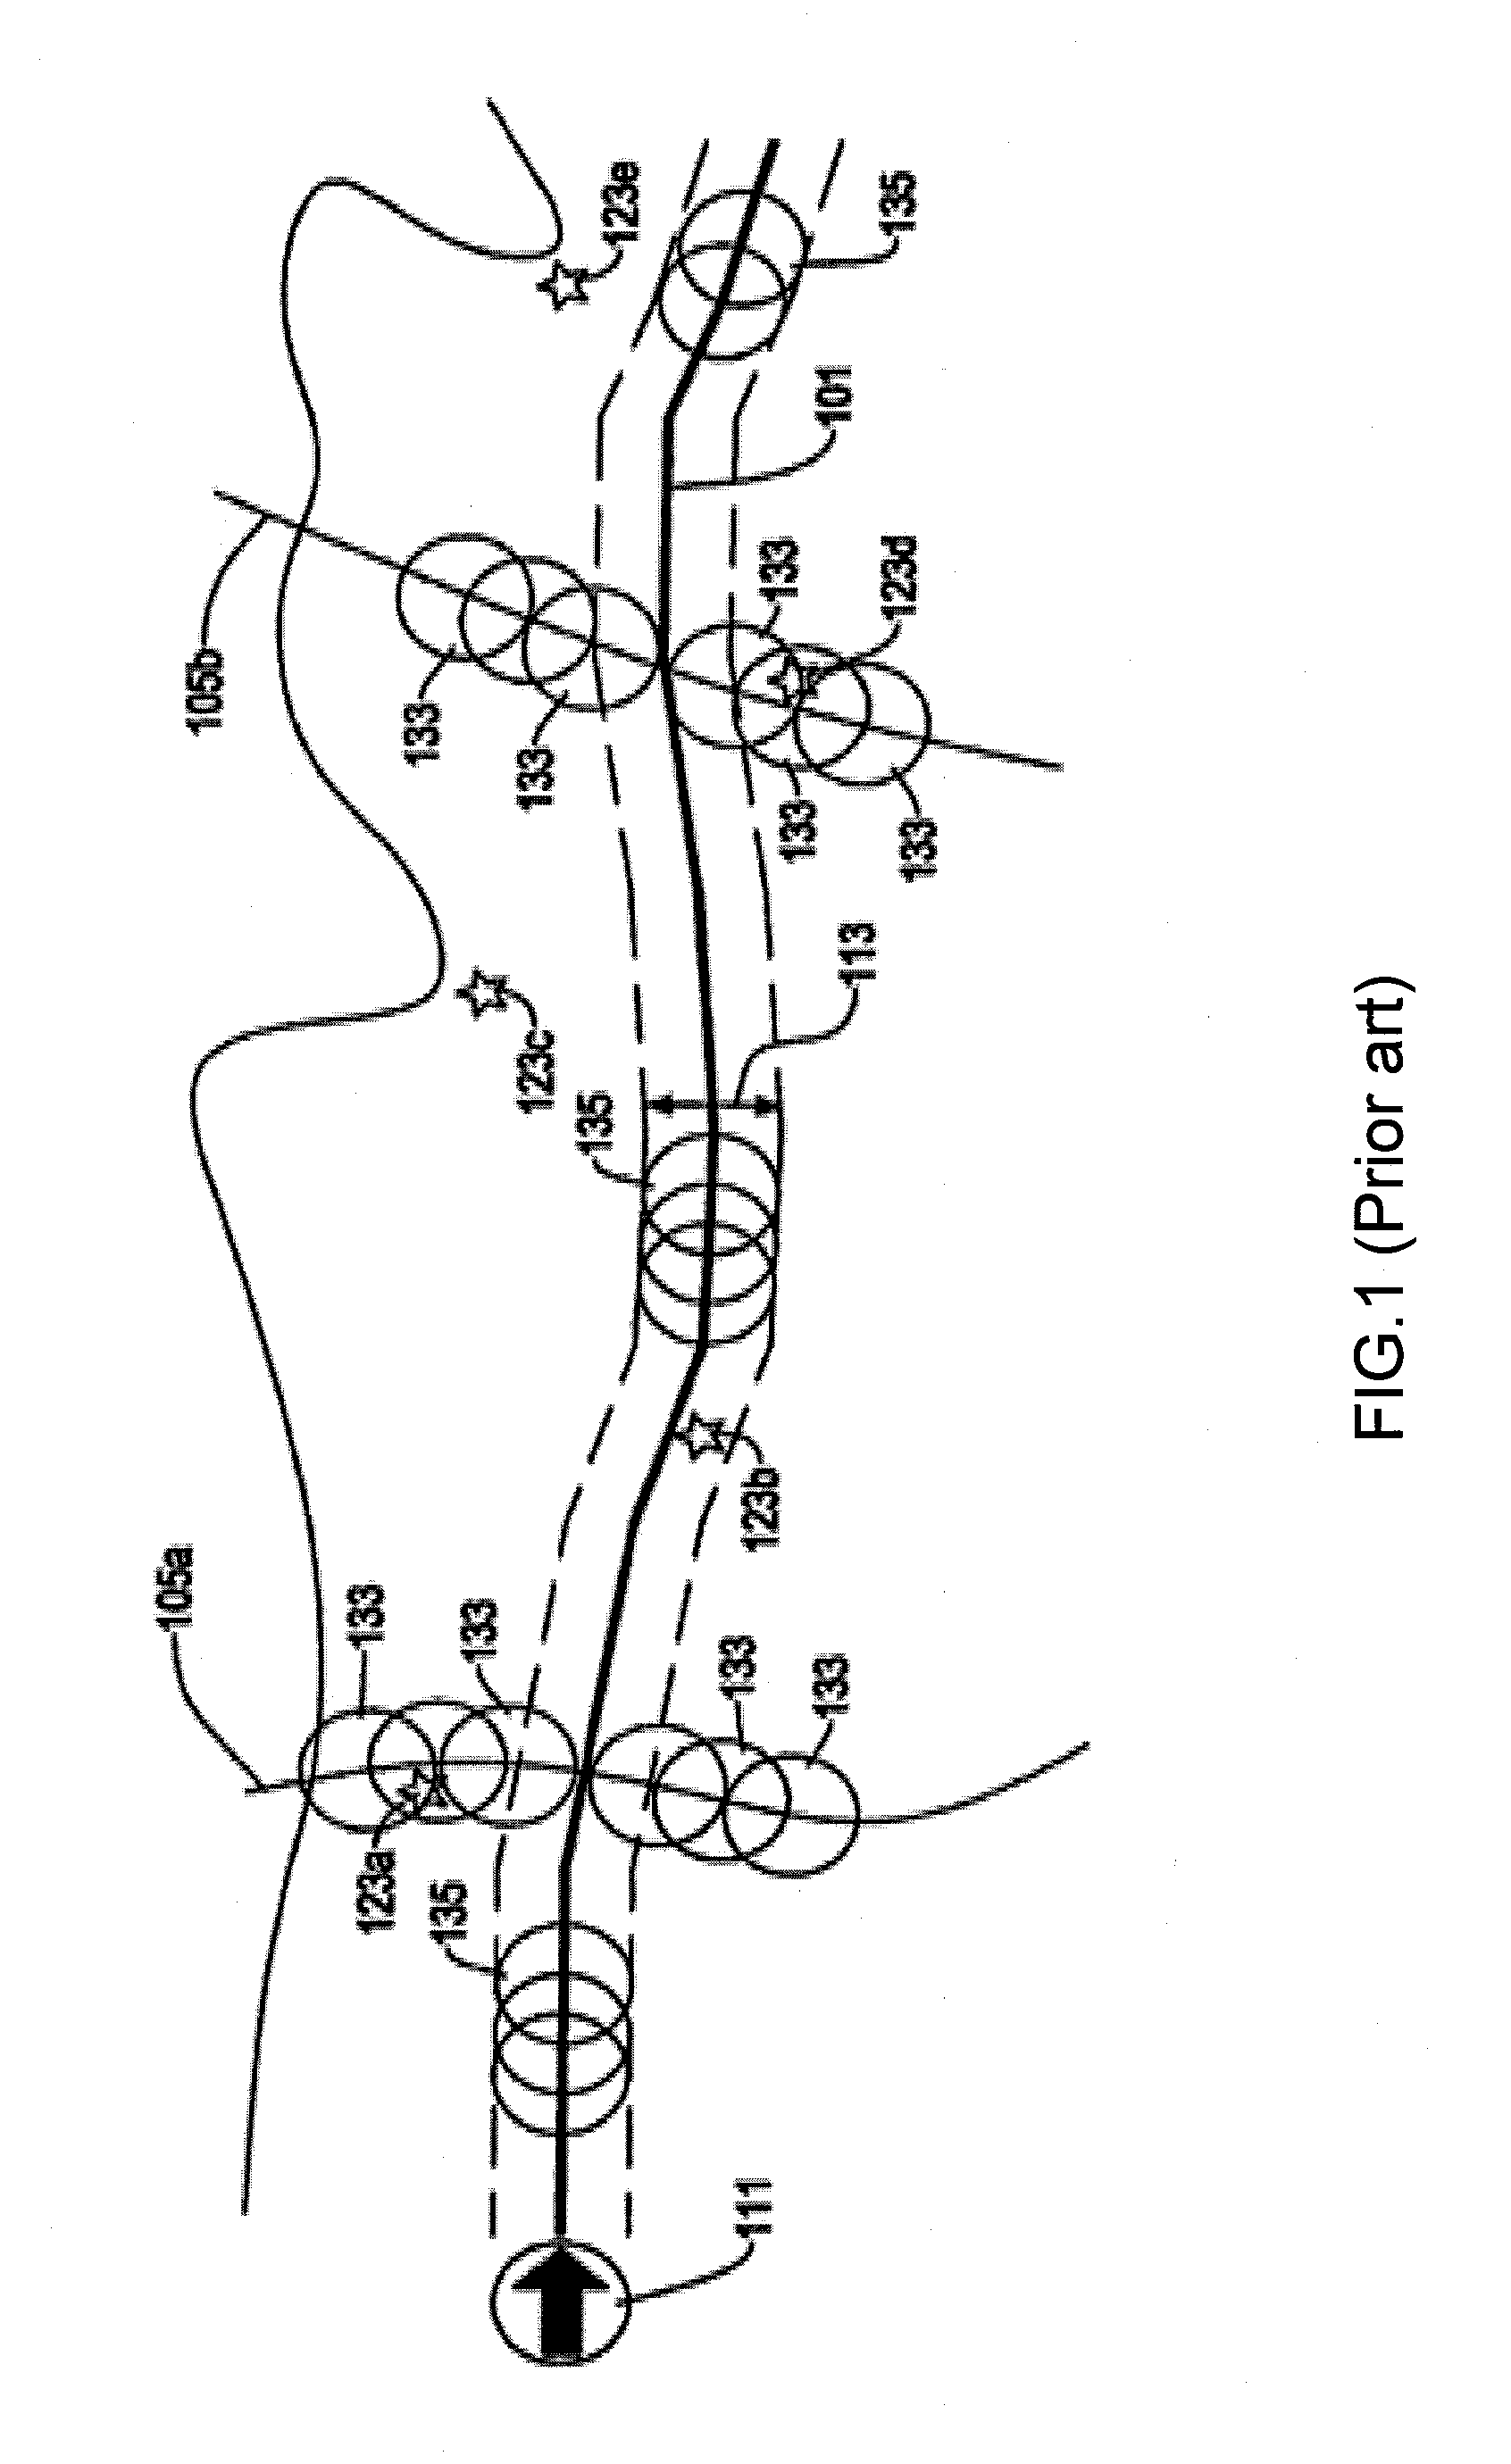 METHOD AND APPARATUS TO FILTER AND DISPLAY ONLY POIs CLOSEST TO A ROUTE